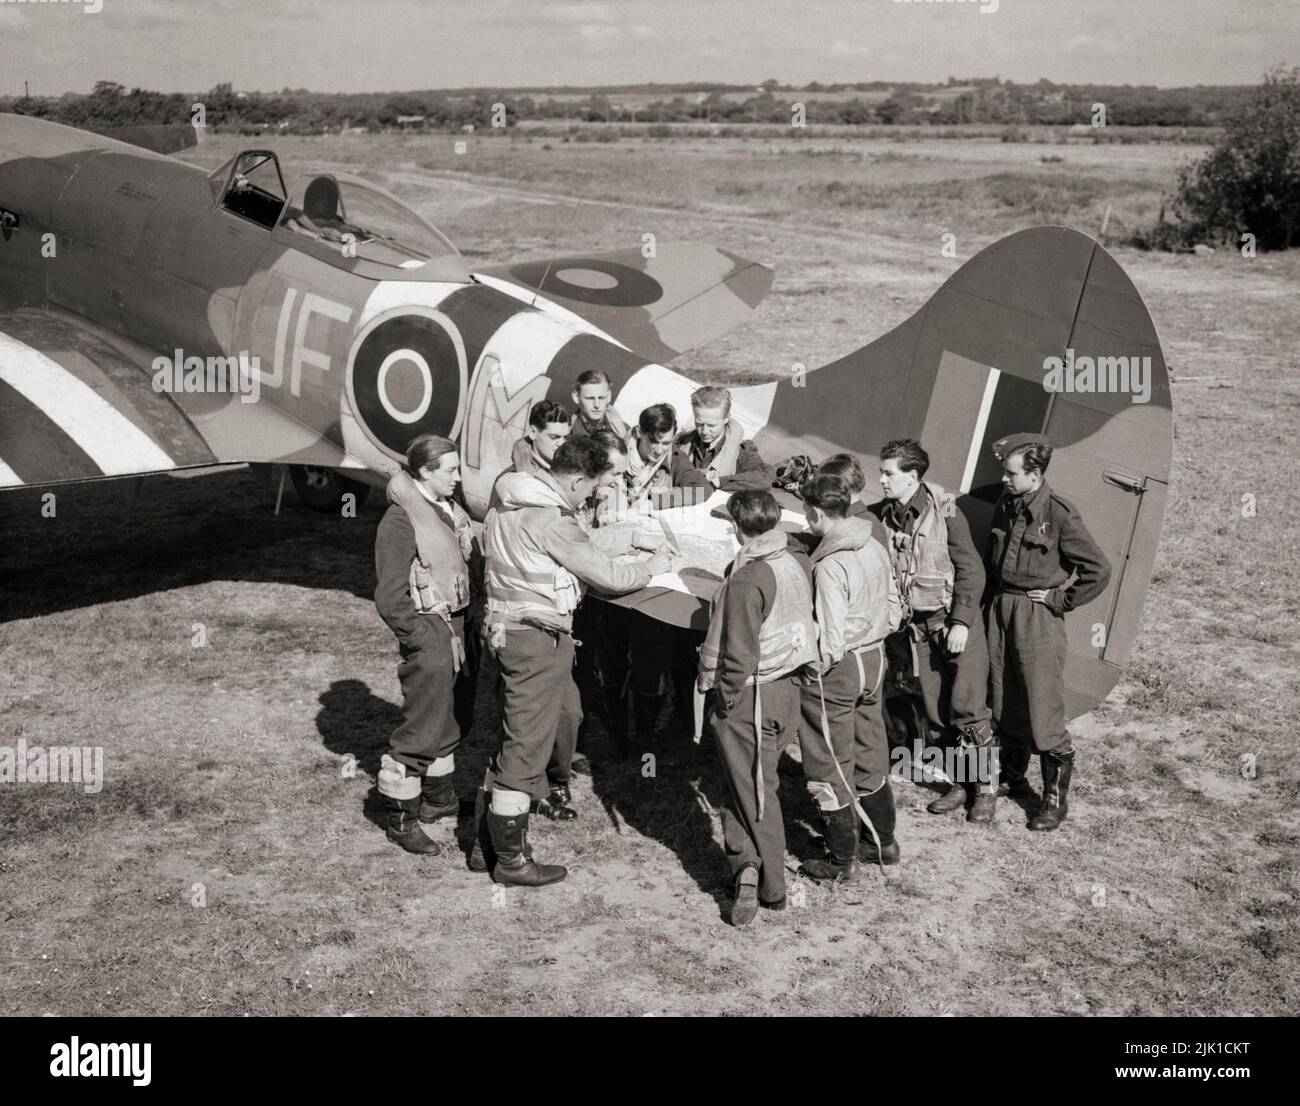 A pilot briefing on the elevator of a Hawker Tempest Mark V, 'JF-M' at Newchurch, Kent, prior to a sweep over the Caen area. The Hawker Tempest was a British fighter aircraft used by the Royal Air Force (RAF) used from 1944 in the Second World War. It was the fastest single-engine propeller-driven aircraft of the war at low altitude. It performed low-level interception, particularly against the V-1 flying bomb threat, and ground attack against rail infrastructure in Germany and Luftwaffe aircraft on the ground Stock Photo